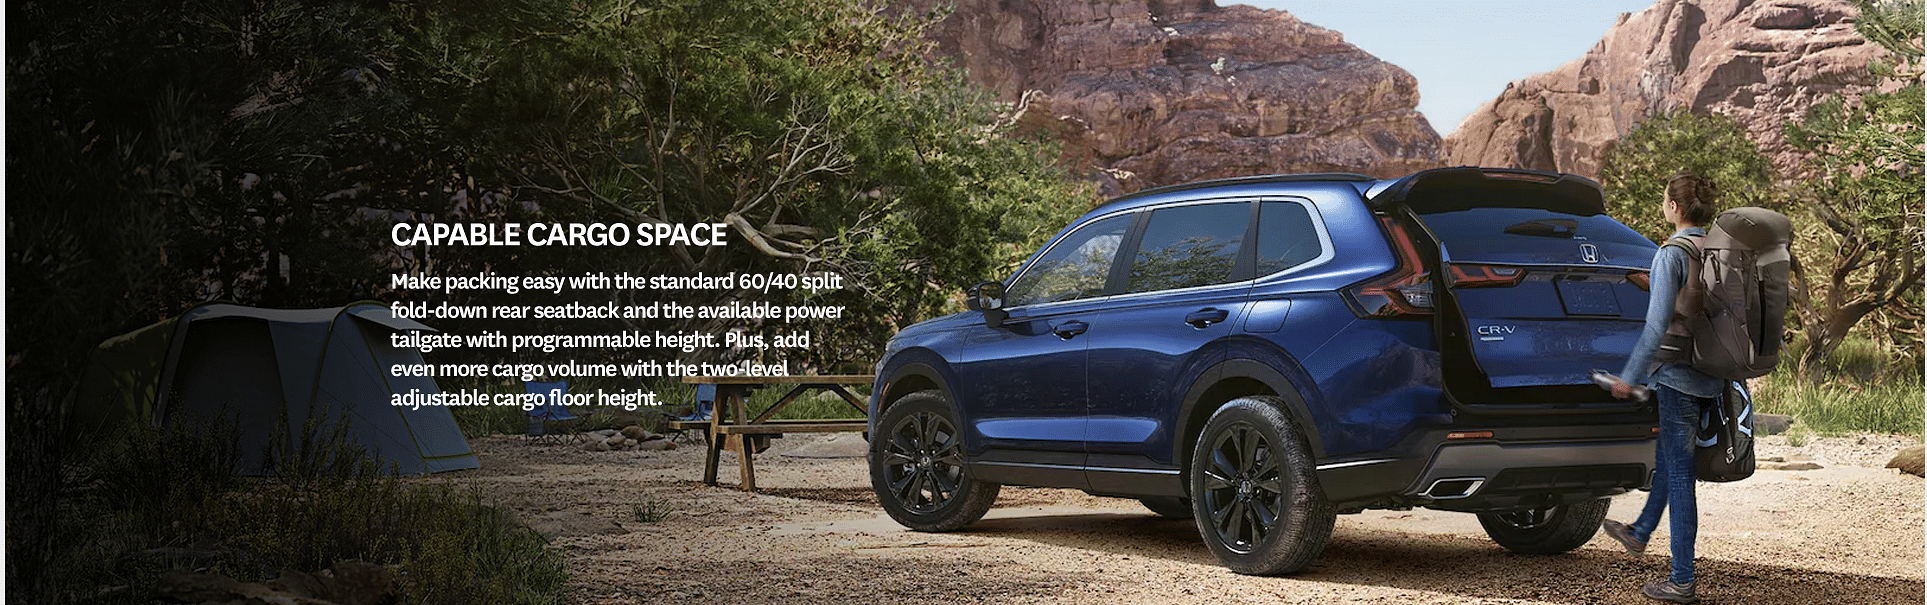 Capable Cargo Space. Make packing easy with the standard 60/40 split fold-down rear seatback and the available power tailgate with programmable height. Plus, add even more cargo volume with the two-level adjustable cargo floor height.